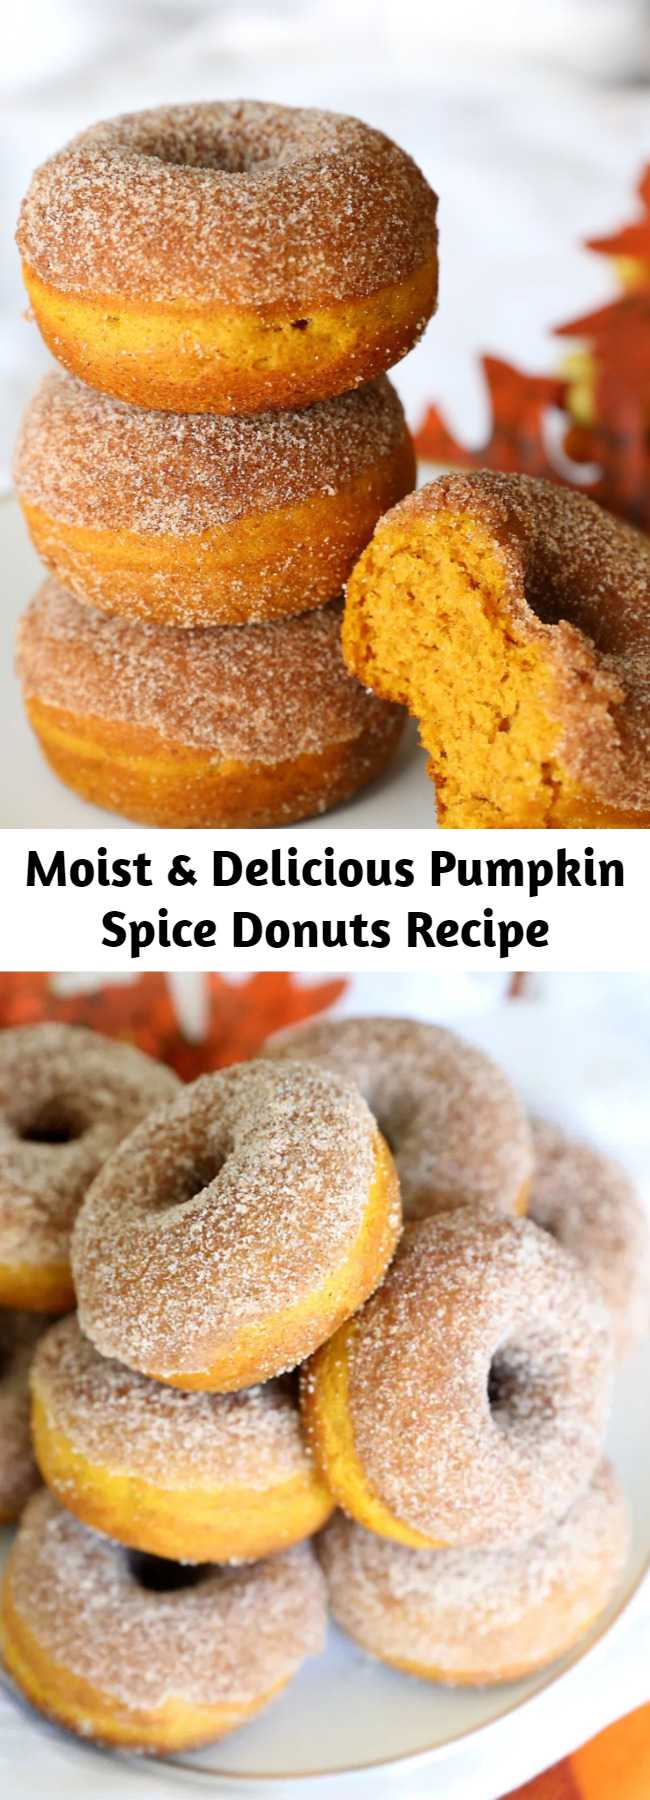 Moist & Delicious Pumpkin Spice Donuts Recipe -  Pumpkin Spice Donuts are your new favorite fall treat! They're baked, not fried, and they are perfectly soft + delicious and full of pumpkin spice flavor with a crunchy cinnamon sugar topping.